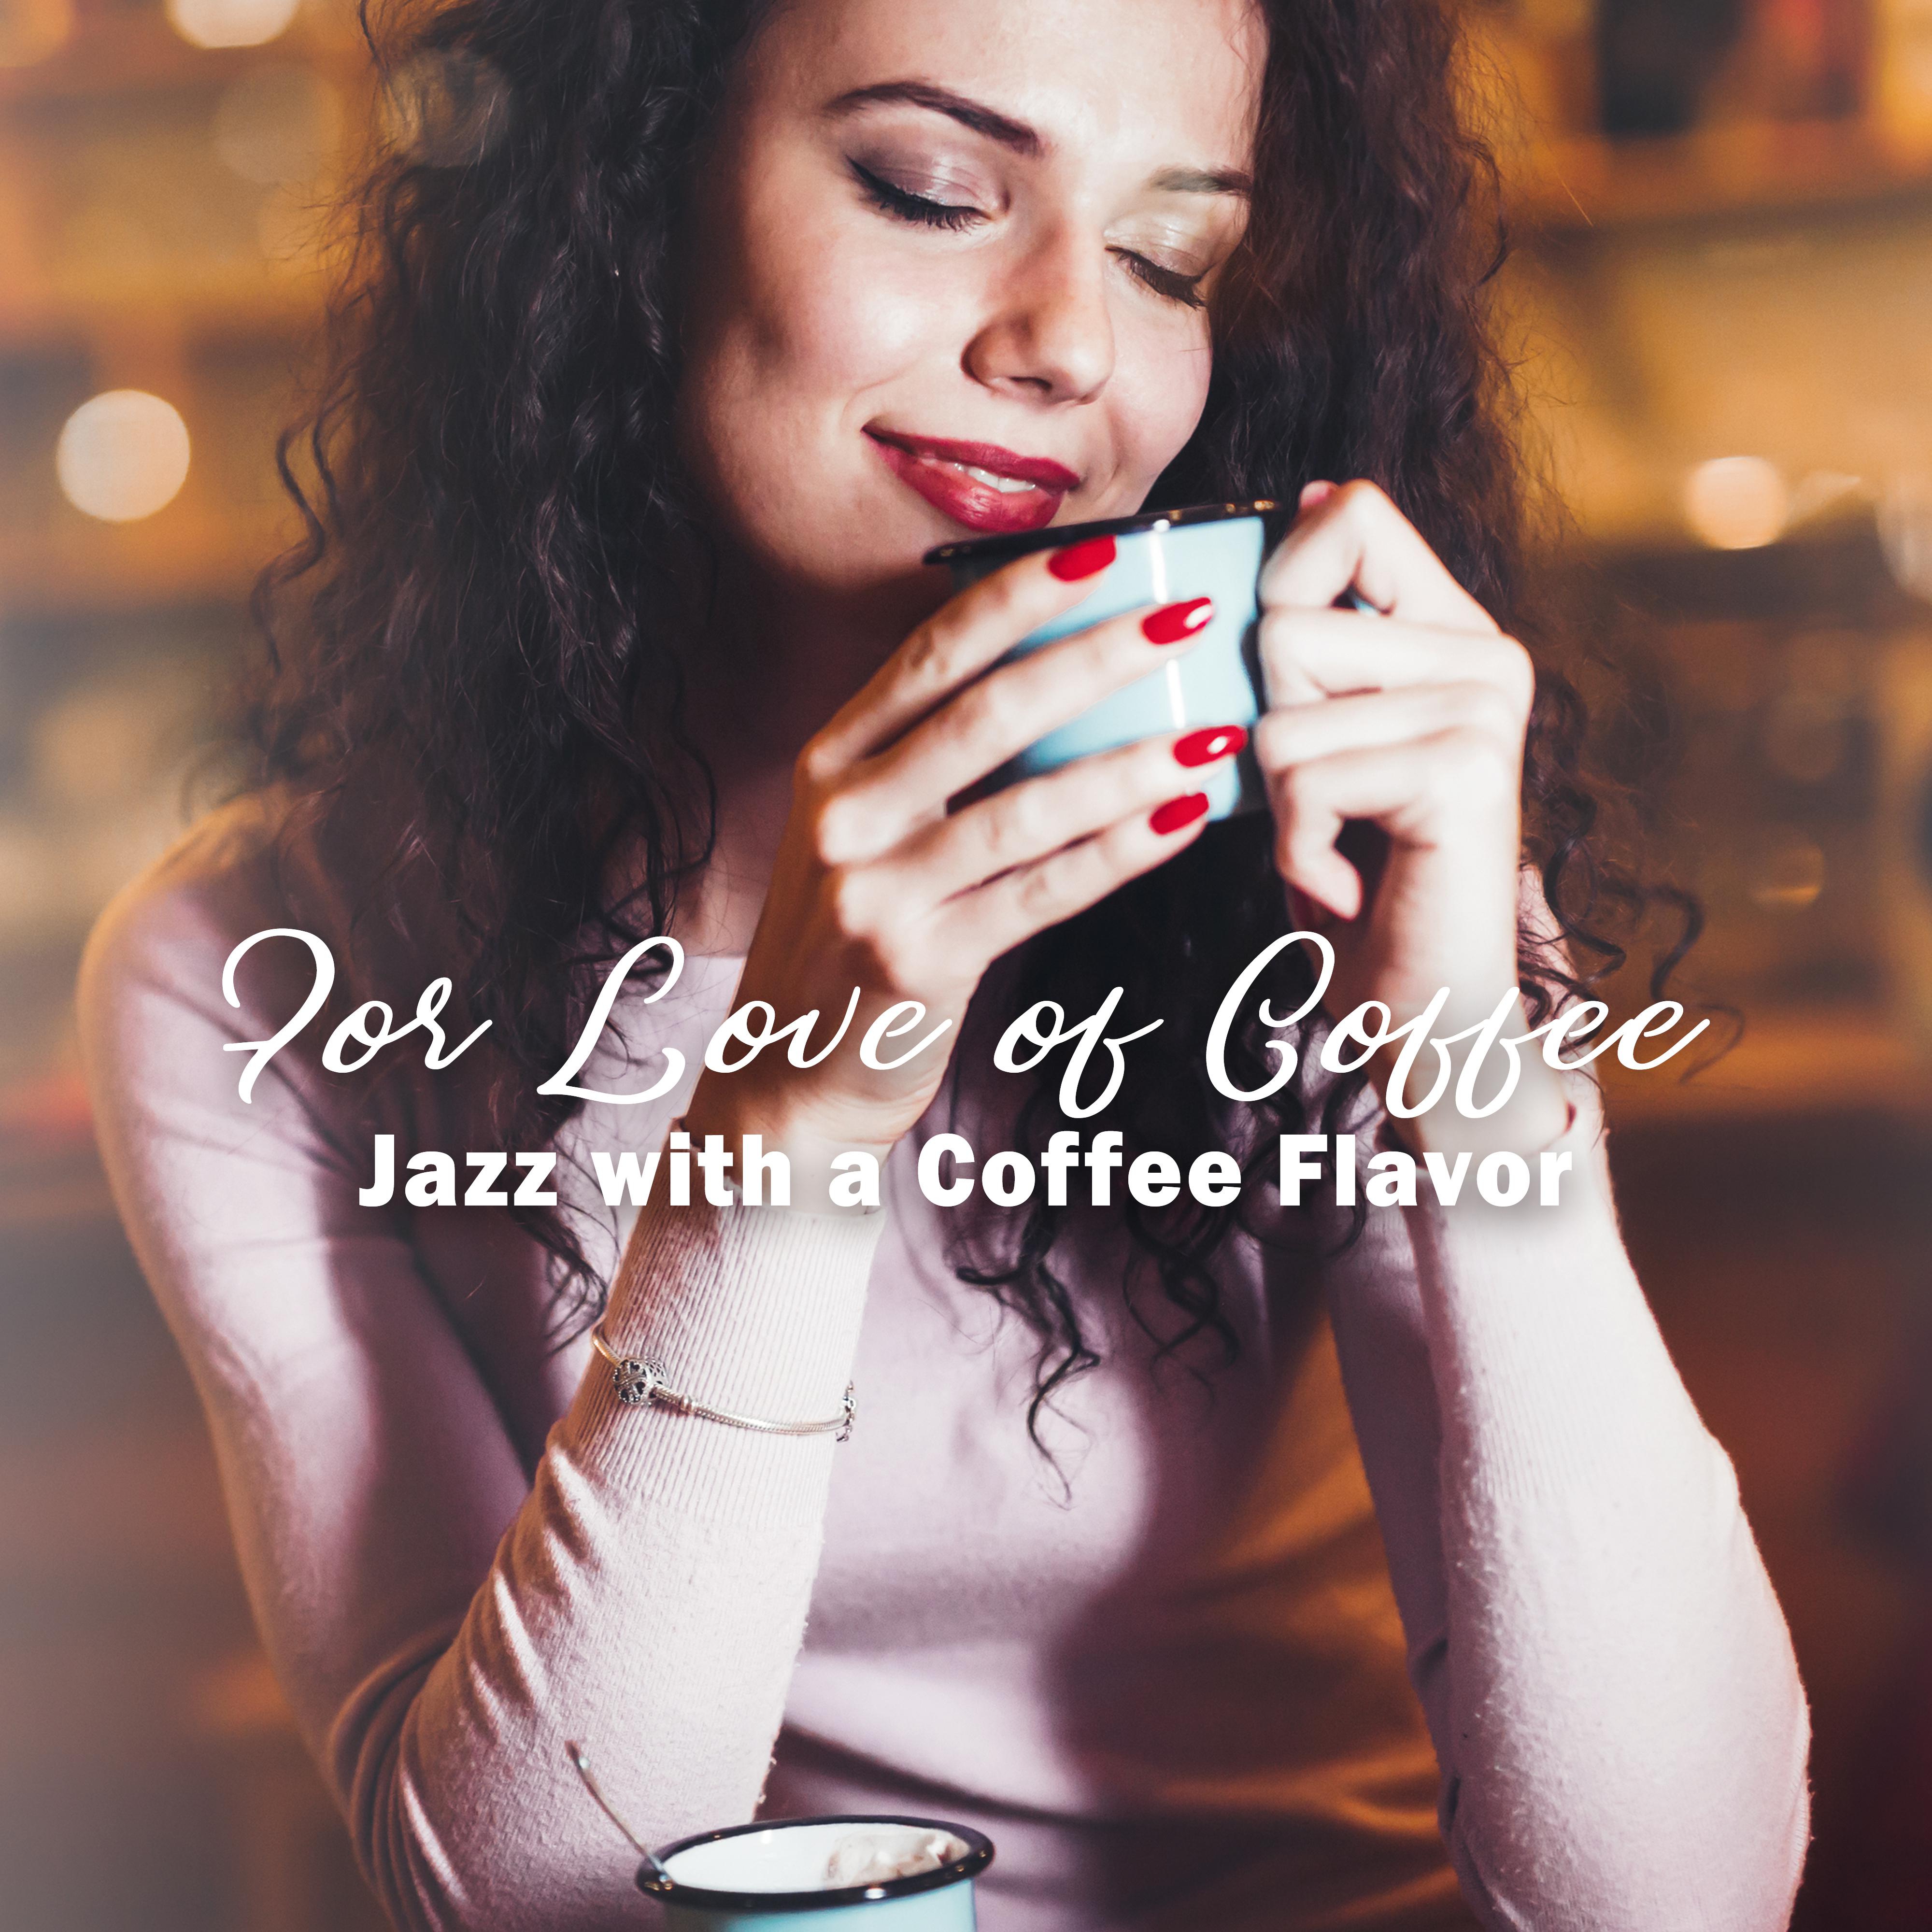 For Love of Coffee - Jazz with a Coffee Flavor